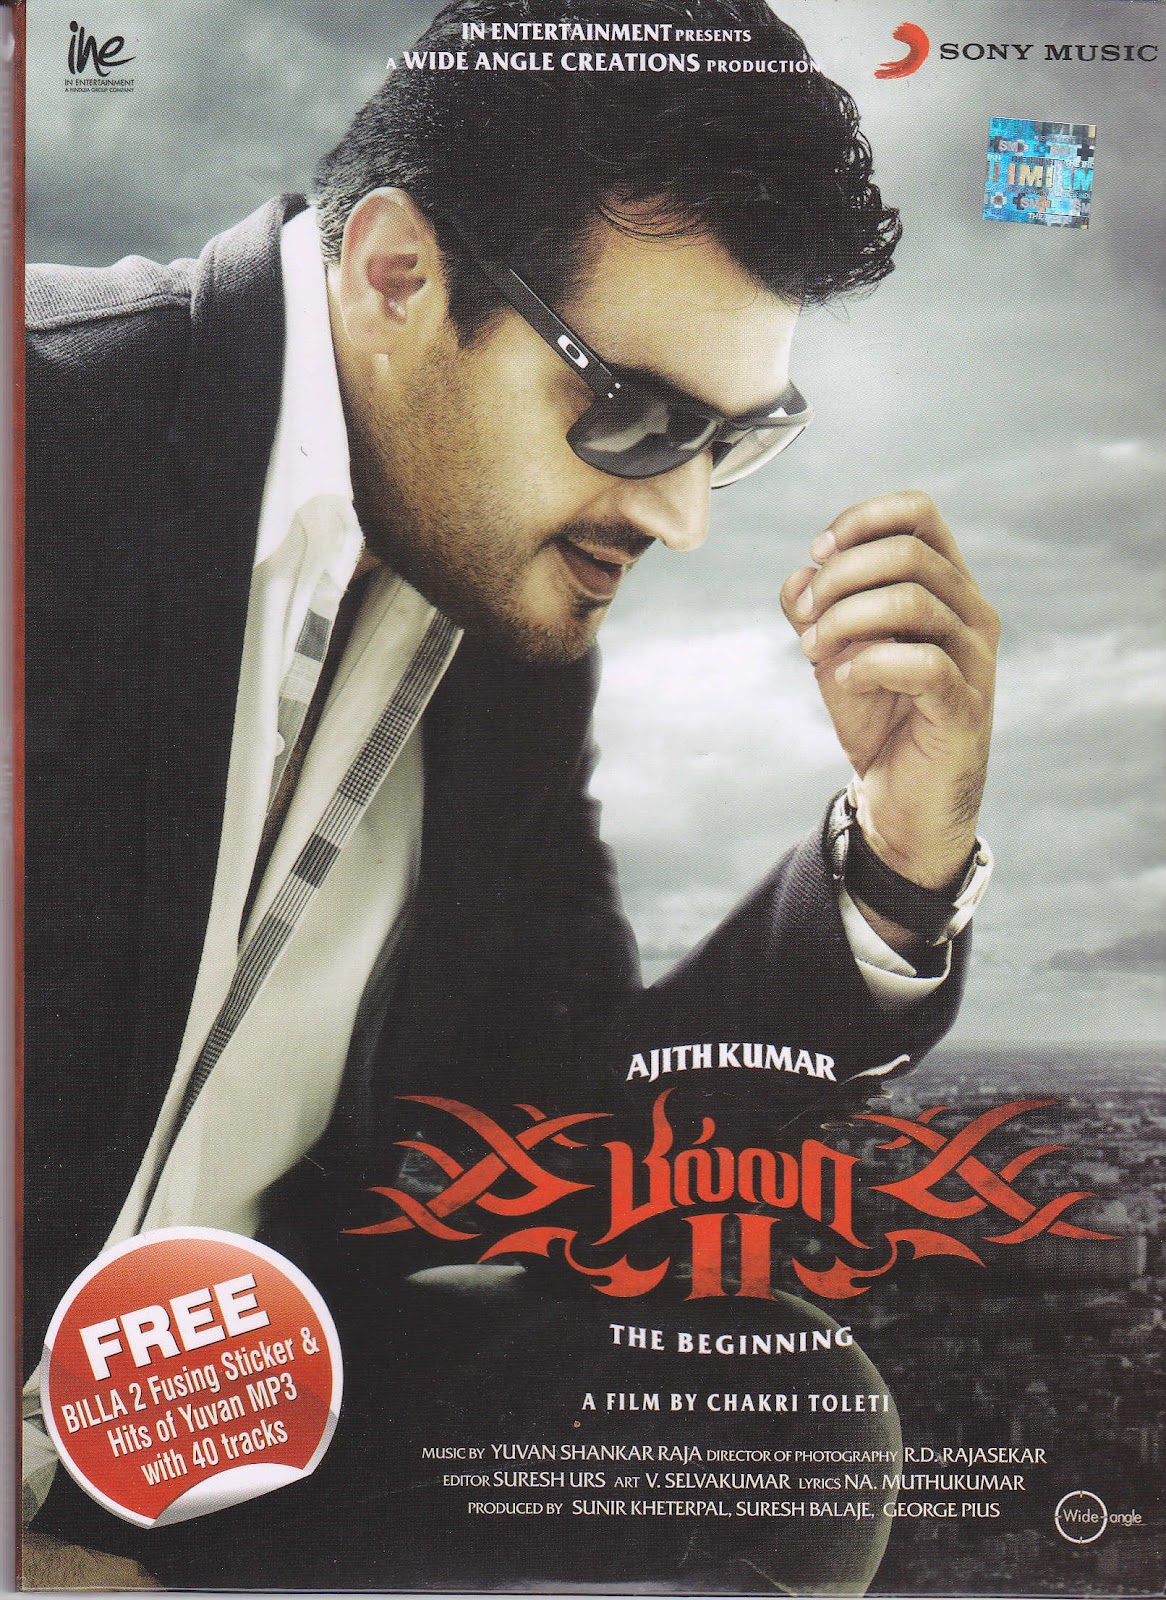 BILLA II Wallpapers and posters